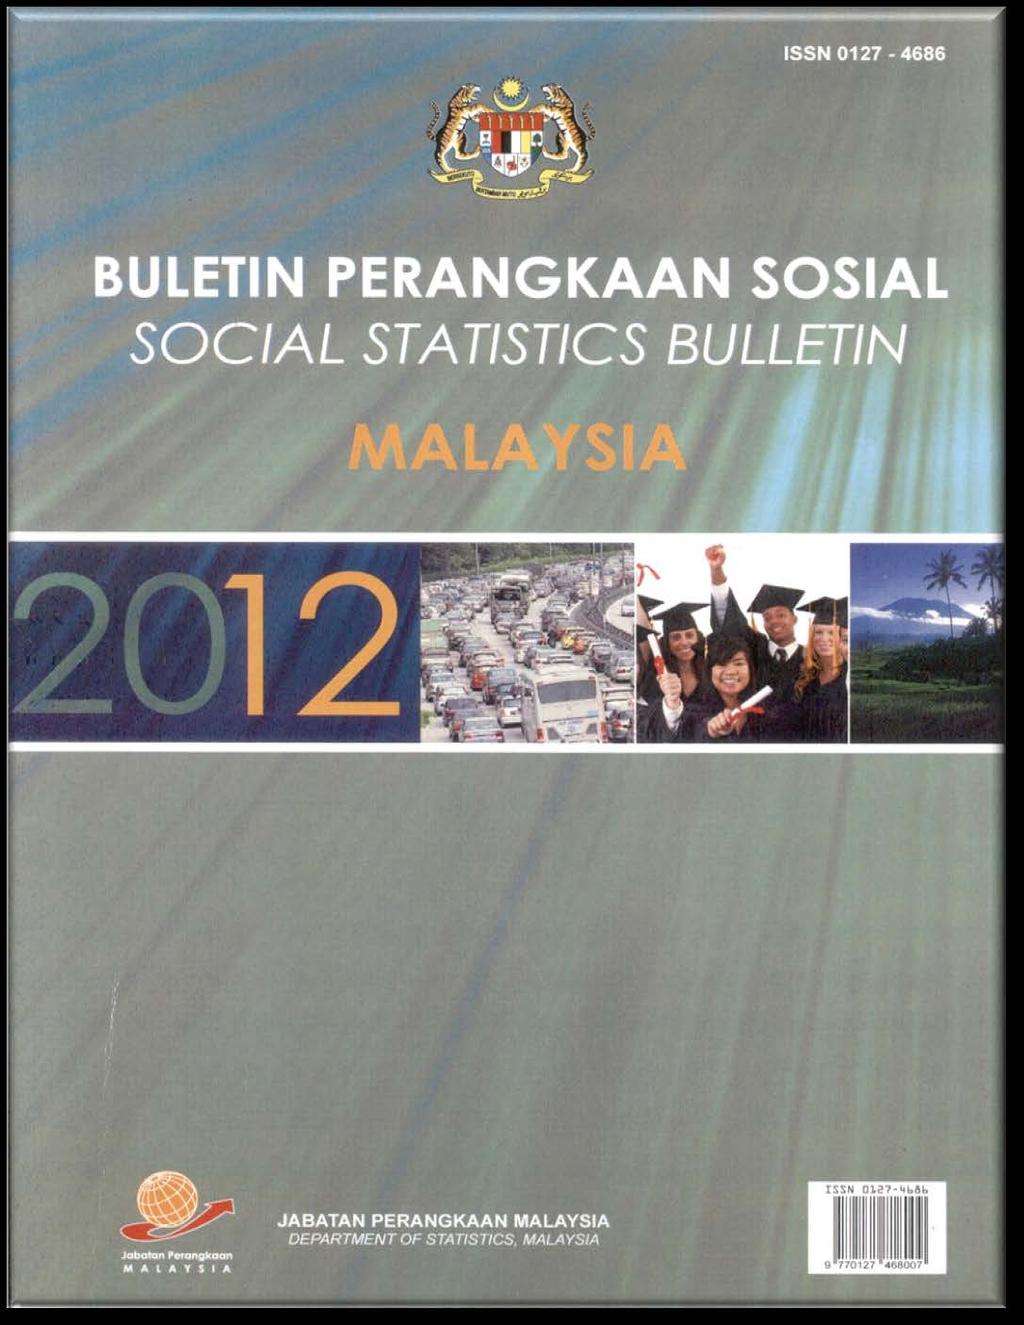 Since 1969 DOSM has come up with a compilation of secondary social statistics.